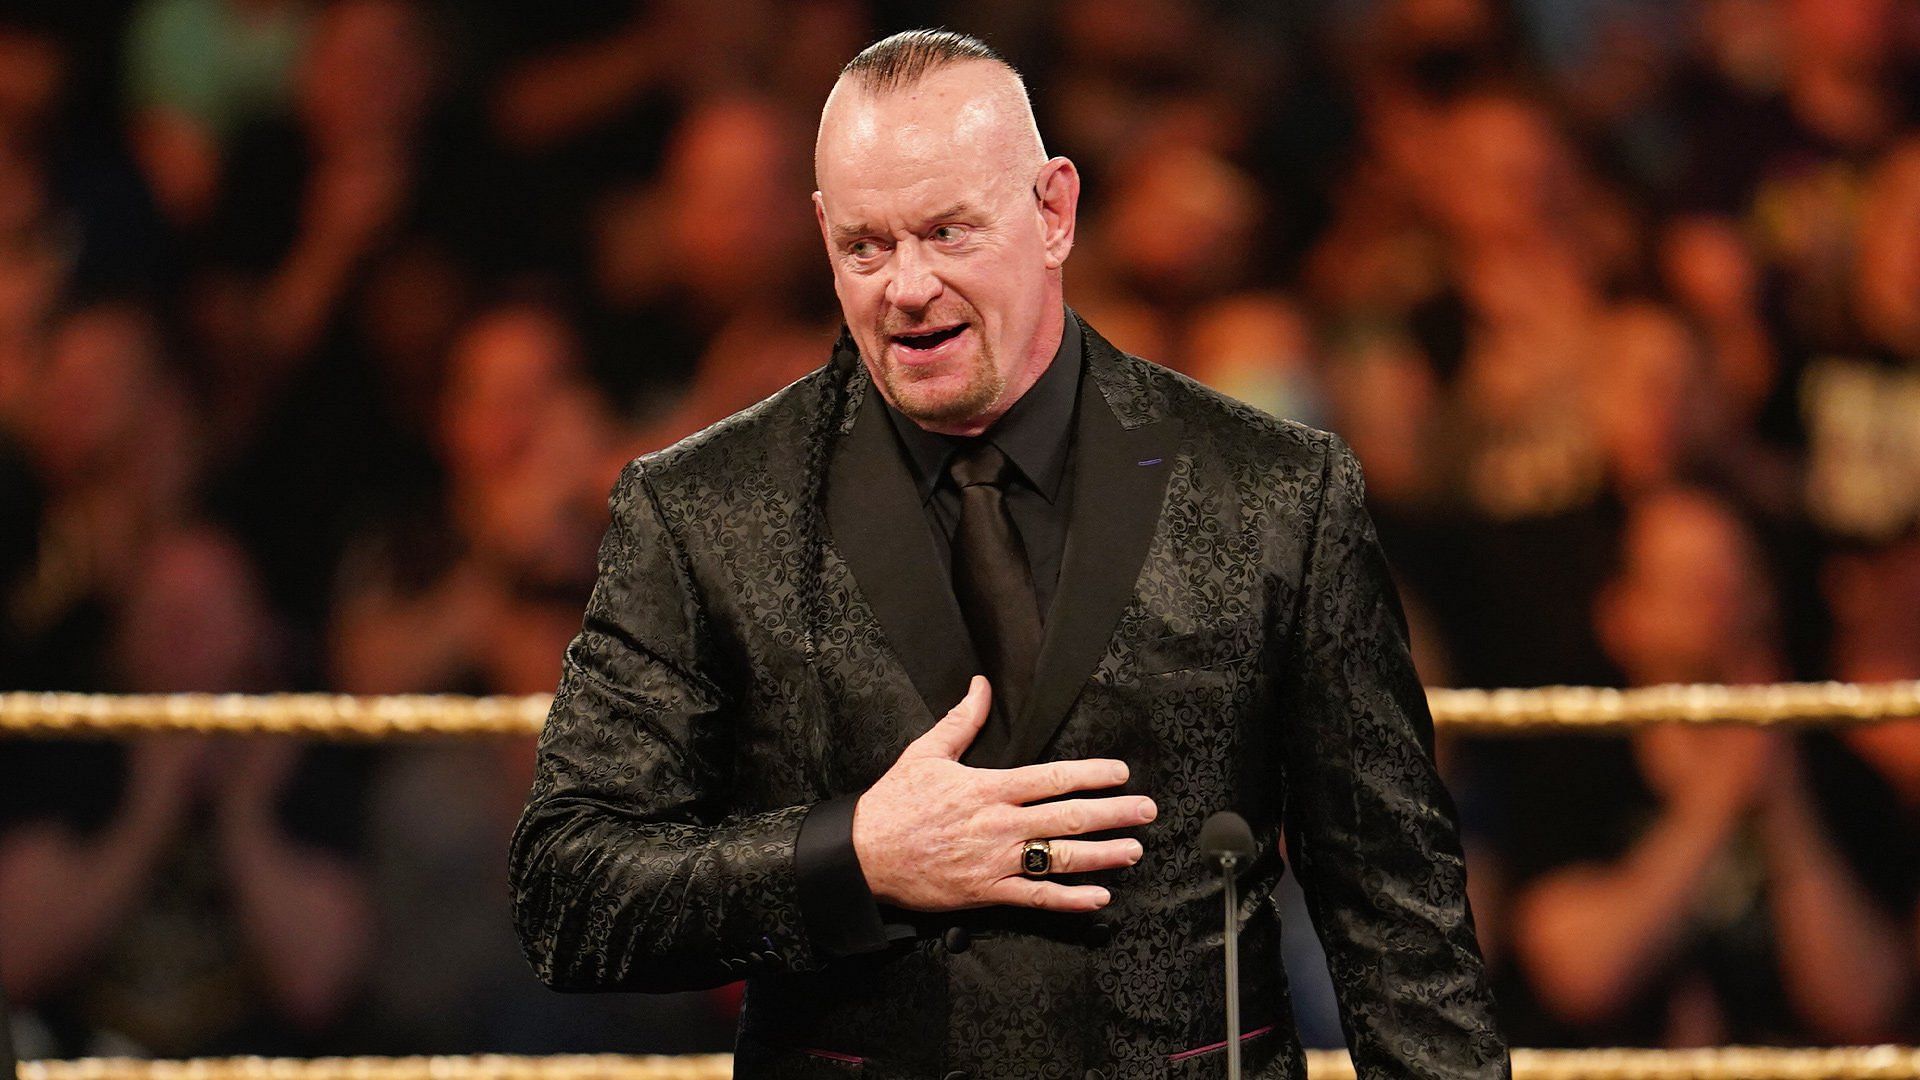 The Undertaker had feuds with a number of legends!